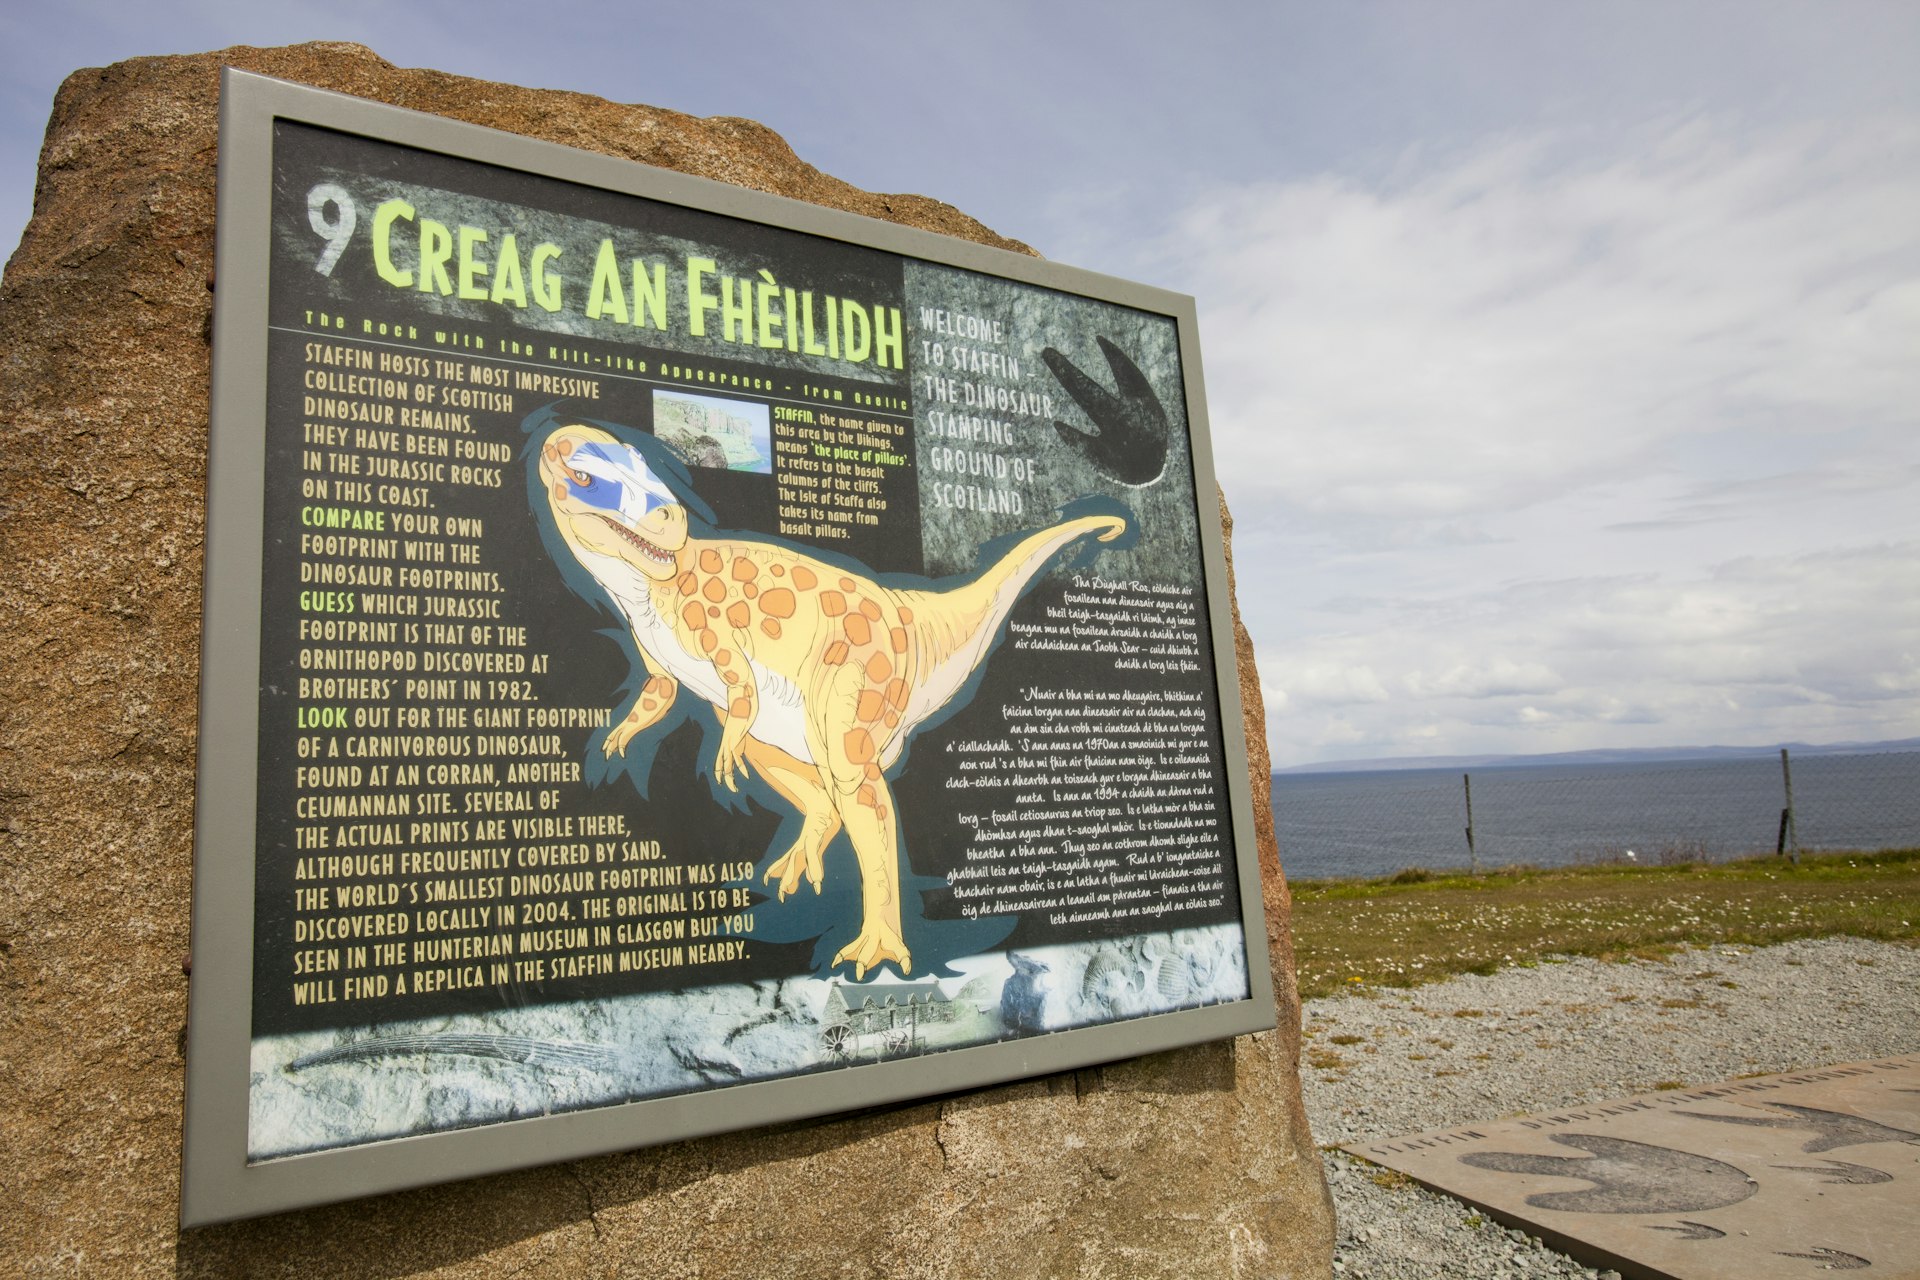 A sign about dinosaur footprints with a large dino illustration on the Isle of Skye